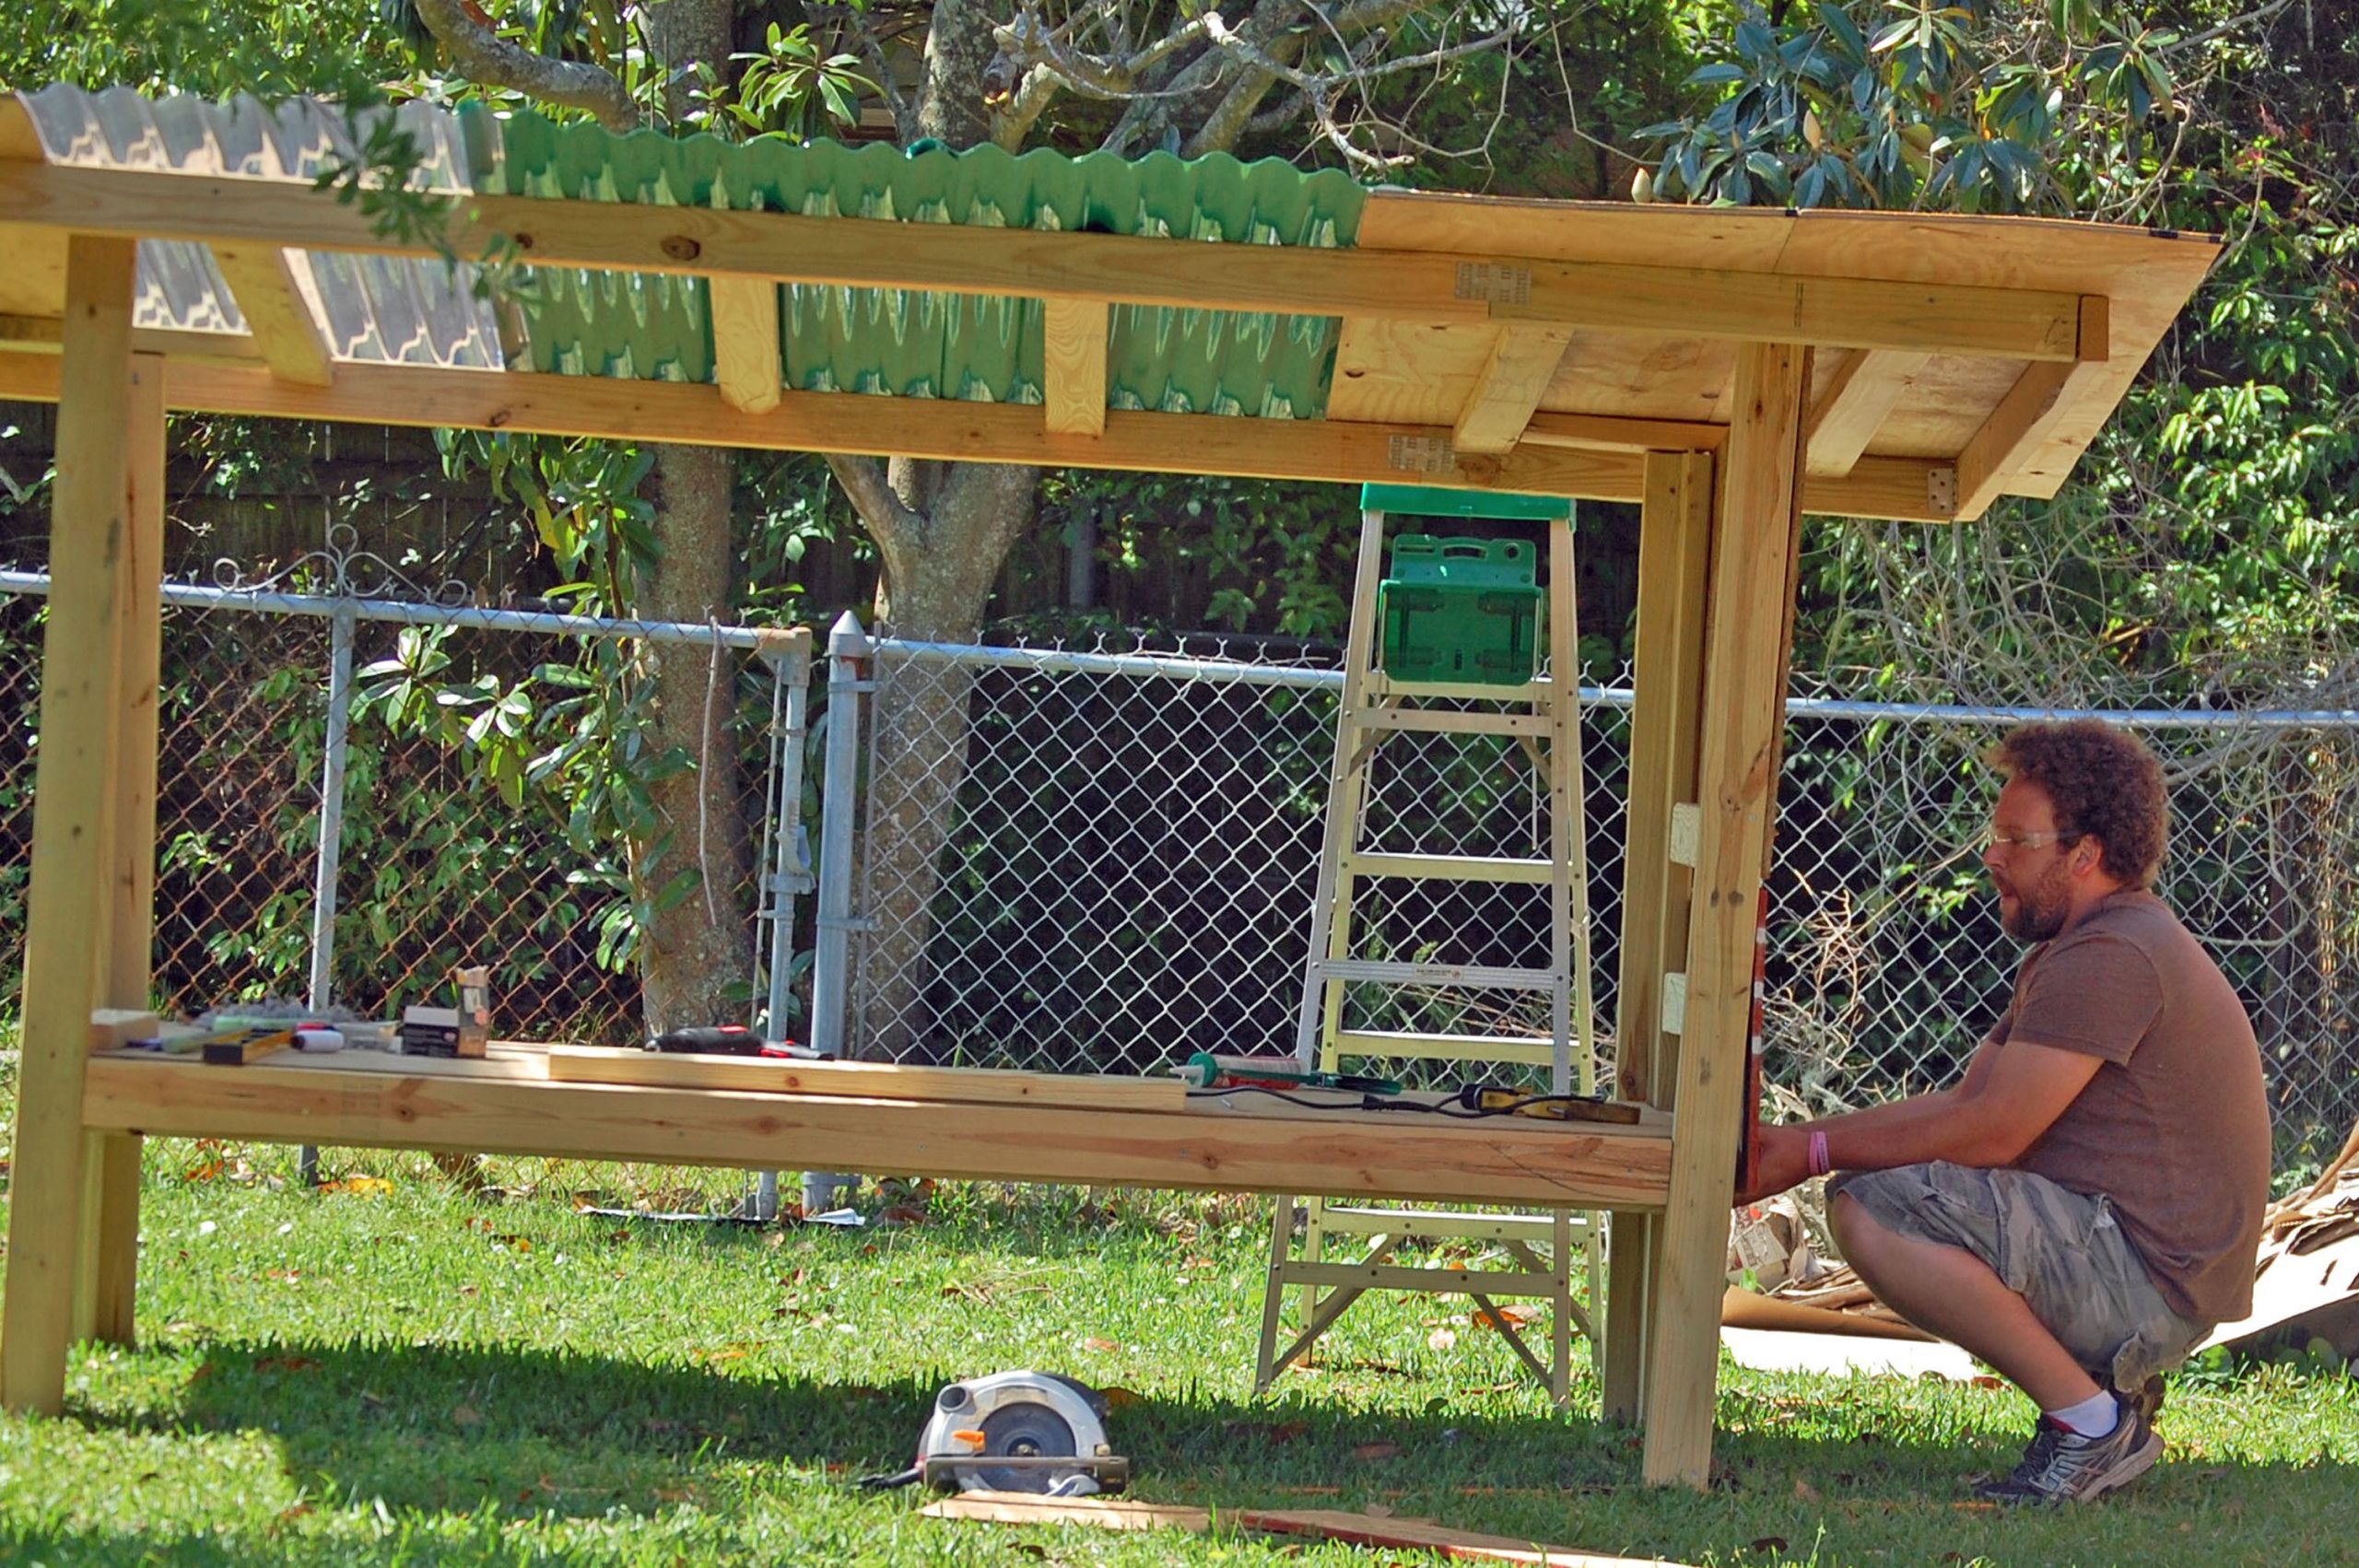 Easy DIY Chicken Coop Plans
 Our DIY Chicken Coop From Recycled Materials